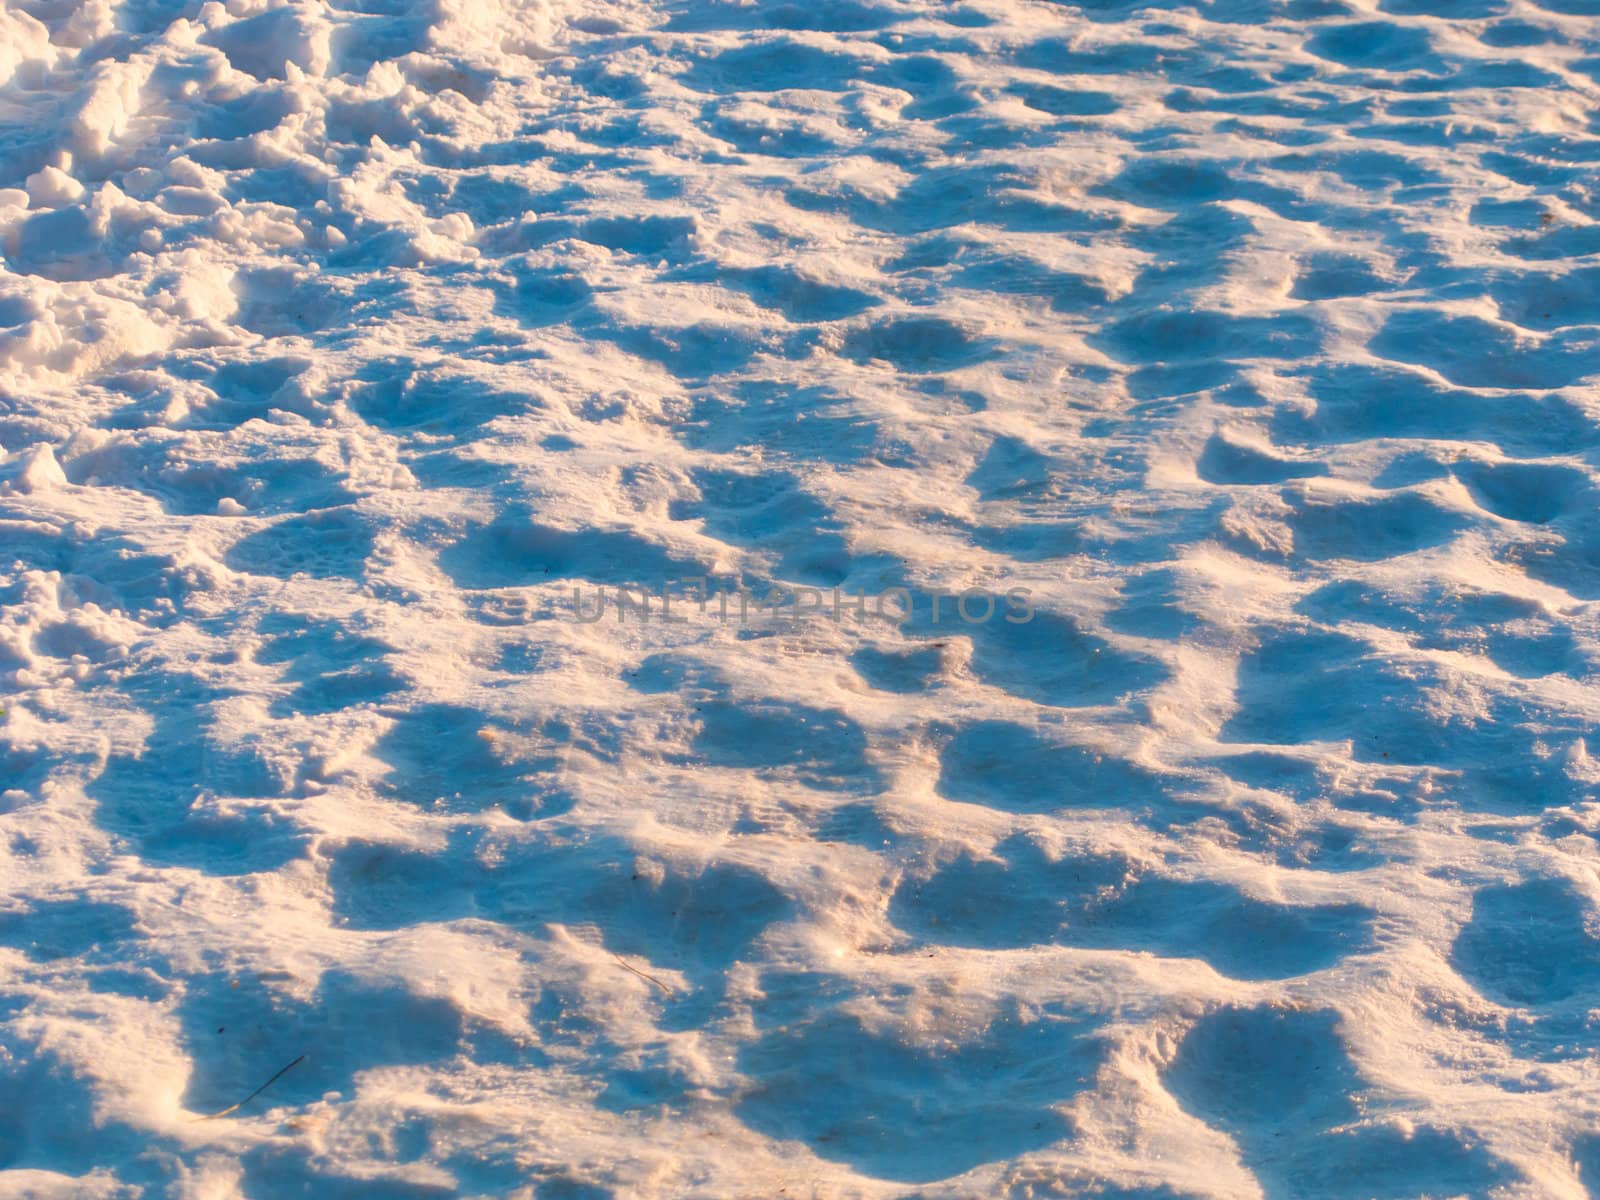 Footprints worn into the snow on a winter day